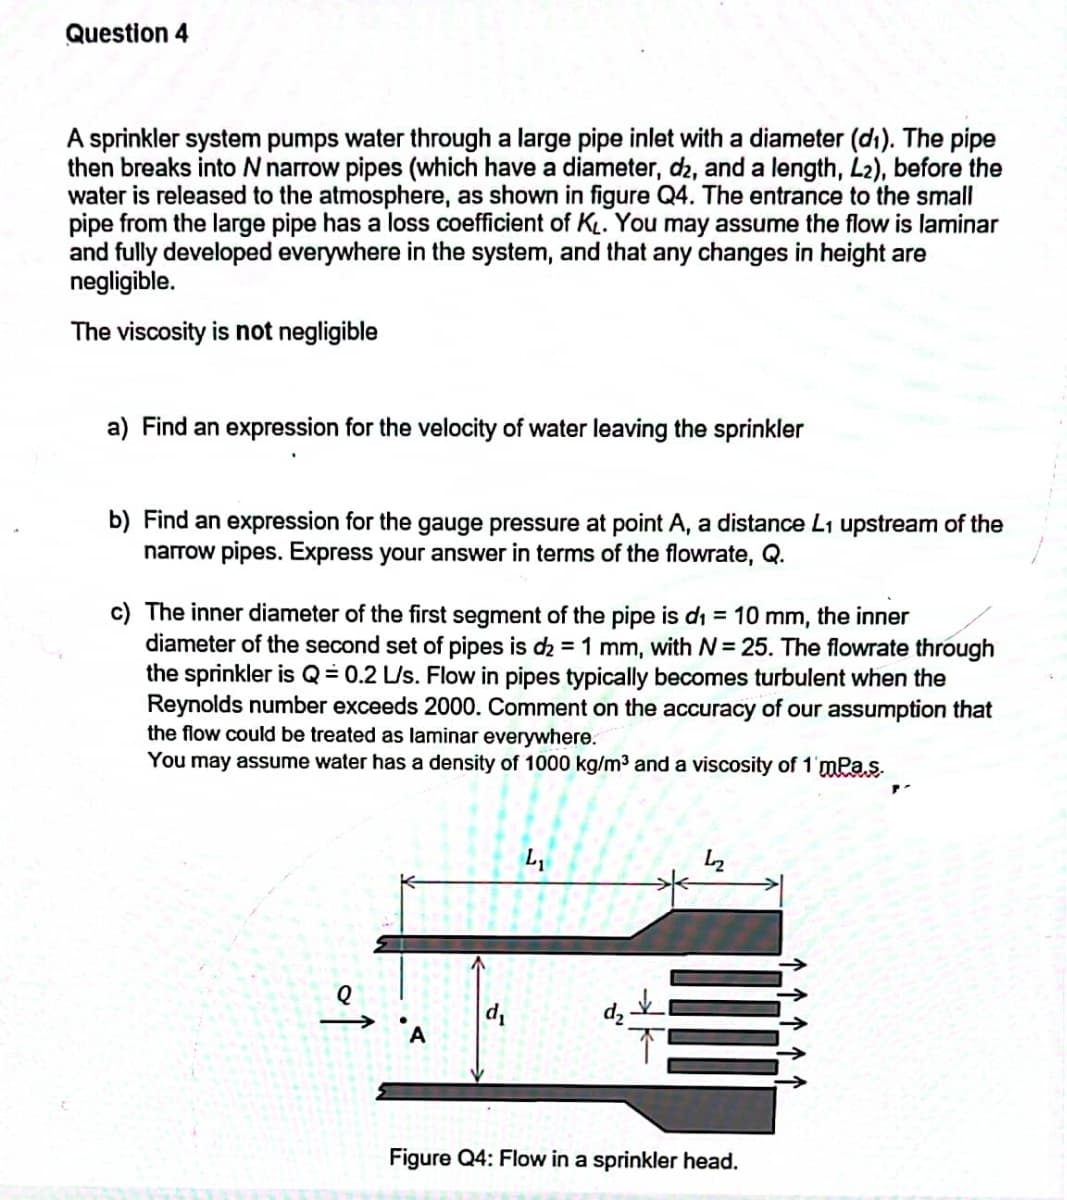 Question 4
A sprinkler system pumps water through a large pipe inlet with a diameter (d1). The pipe
then breaks into N narrow pipes (which have a diameter, d2, and a length, L2), before the
water is released to the atmosphere, as shown in figure Q4. The entrance to the small
pipe from the large pipe has a loss coefficient of KL. You may assume the flow is laminar
and fully developed everywhere in the system, and that any changes in height are
negligible.
The viscosity is not negligible
a) Find an expression for the velocity of water leaving the sprinkler
b) Find an expression for the gauge pressure at point A, a distance L1 upstream of the
narrow pipes. Express your answer in terms of the flowrate, Q.
c) The inner diameter of the first segment of the pipe is di = 10 mm, the inner
diameter of the second set of pipes is d2 = 1 mm, with N= 25. The flowrate through
the sprinkler is Q= 0.2 L/s. Flow in pipes typically becomes turbulent when the
Reynolds number exceeds 2000. Comment on the accuracy of our assumption that
the flow could be treated as laminar everywhere.
You may assume water has a density of 1000 kg/m3 and a viscosity of 1'mPas.
Figure Q4: Flow in a sprinkler head.
